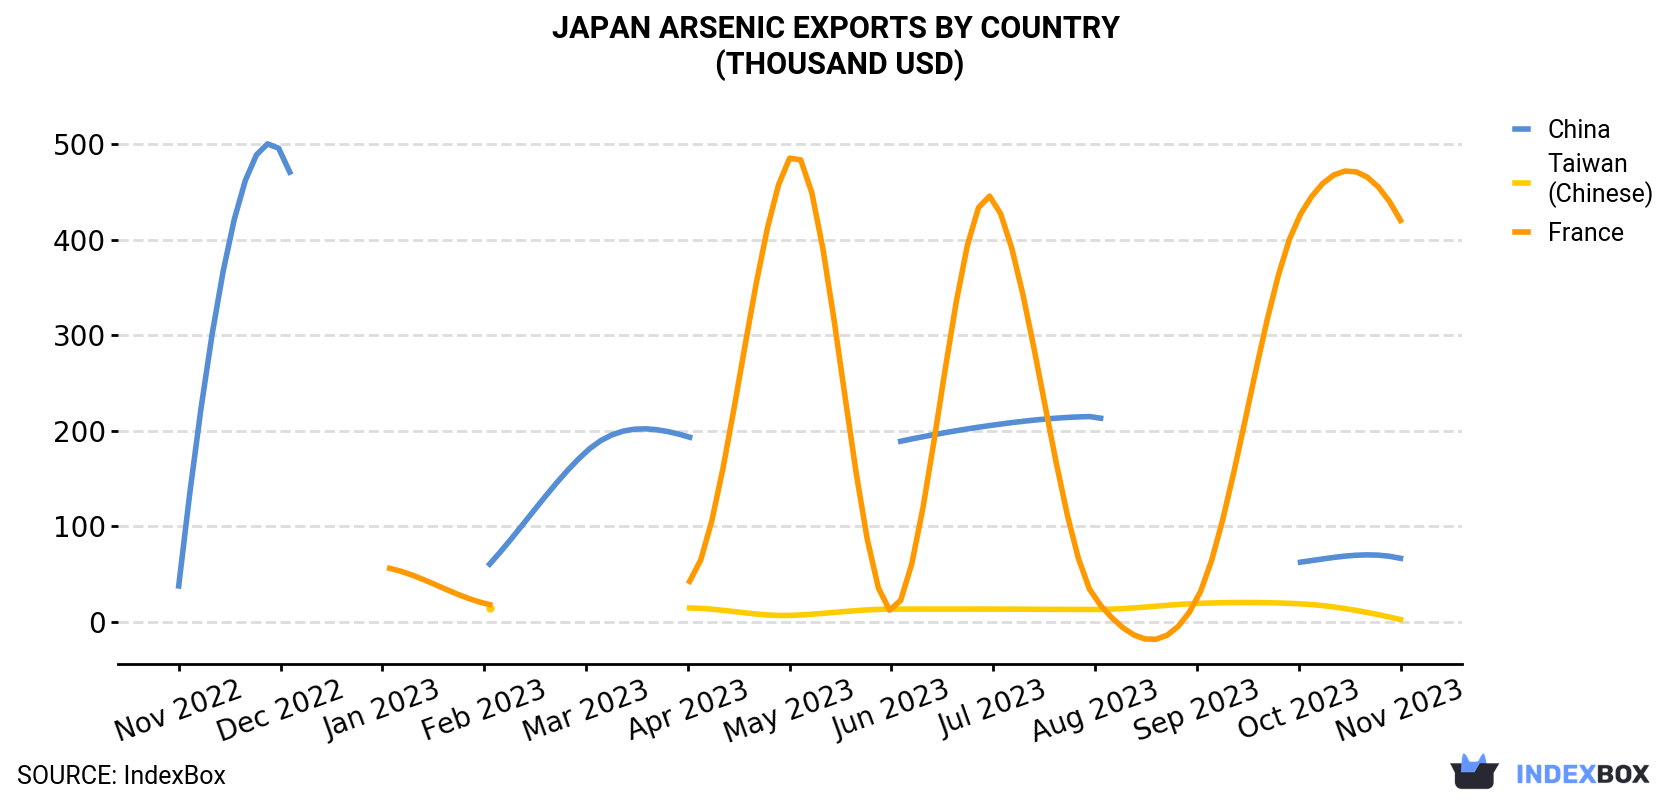 Japan Arsenic Exports By Country (Thousand USD)